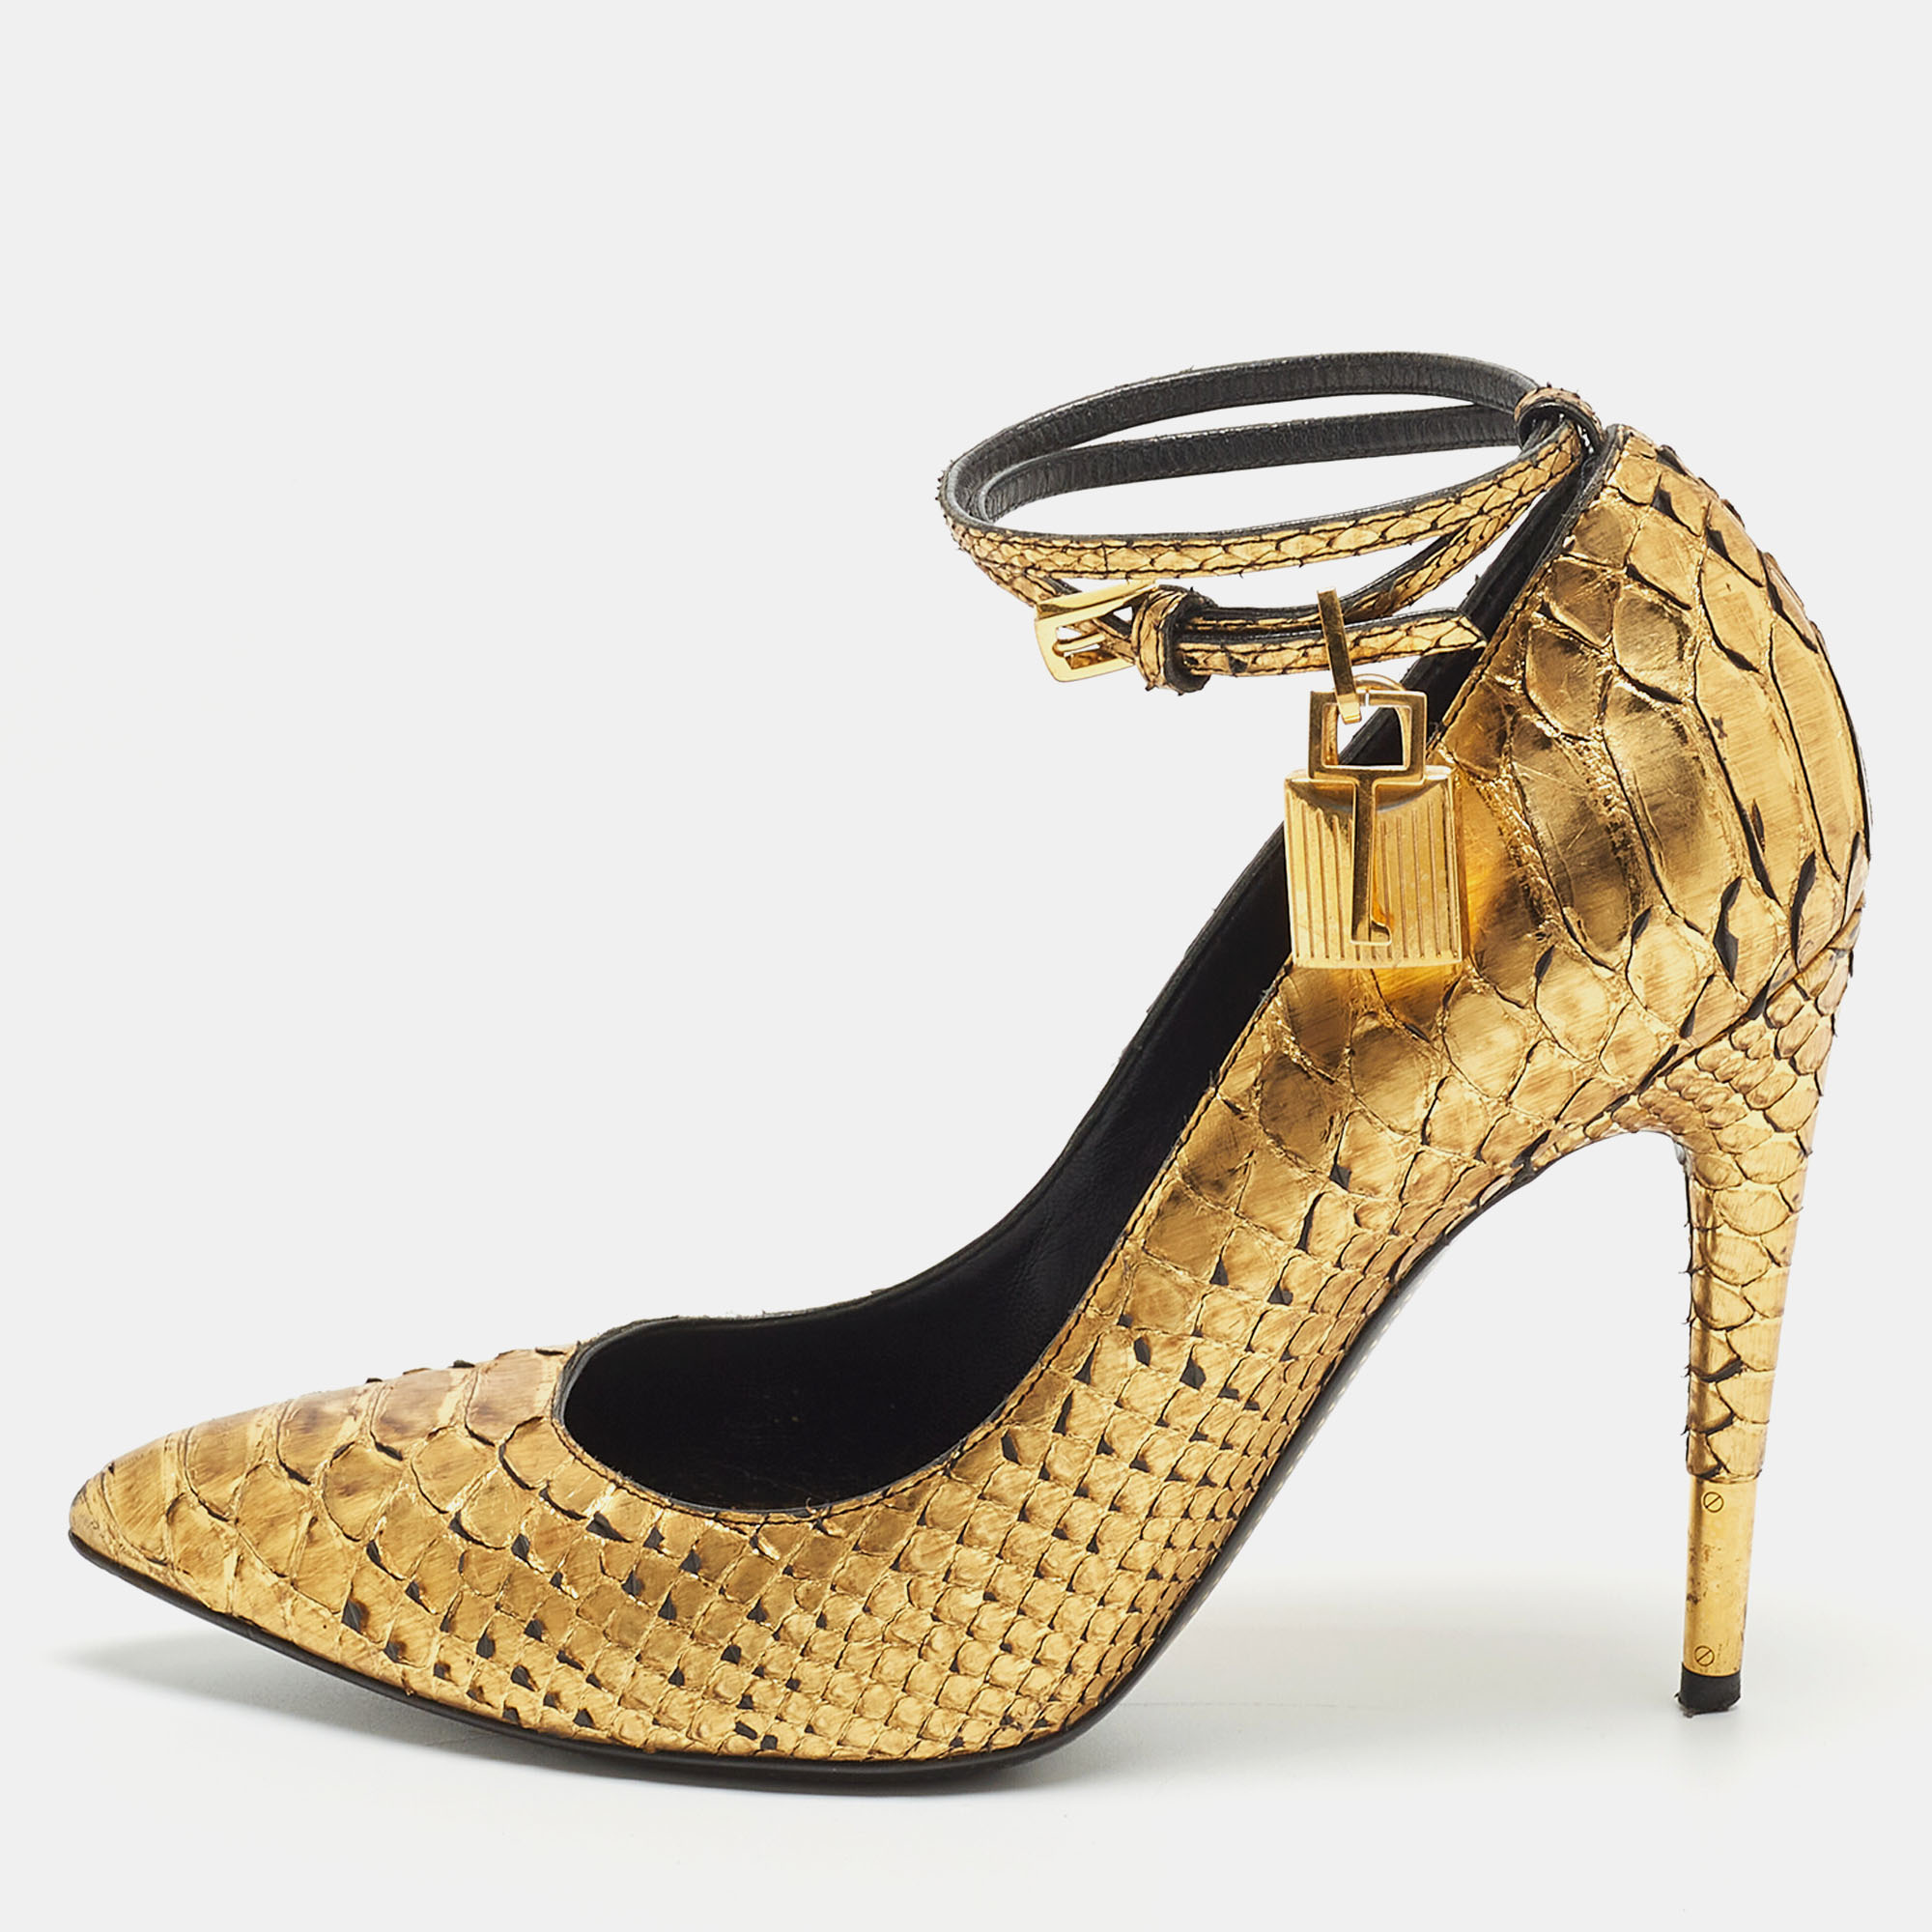 Pre-owned Tom Ford Gold Python Padlock Pumps Size 38.5